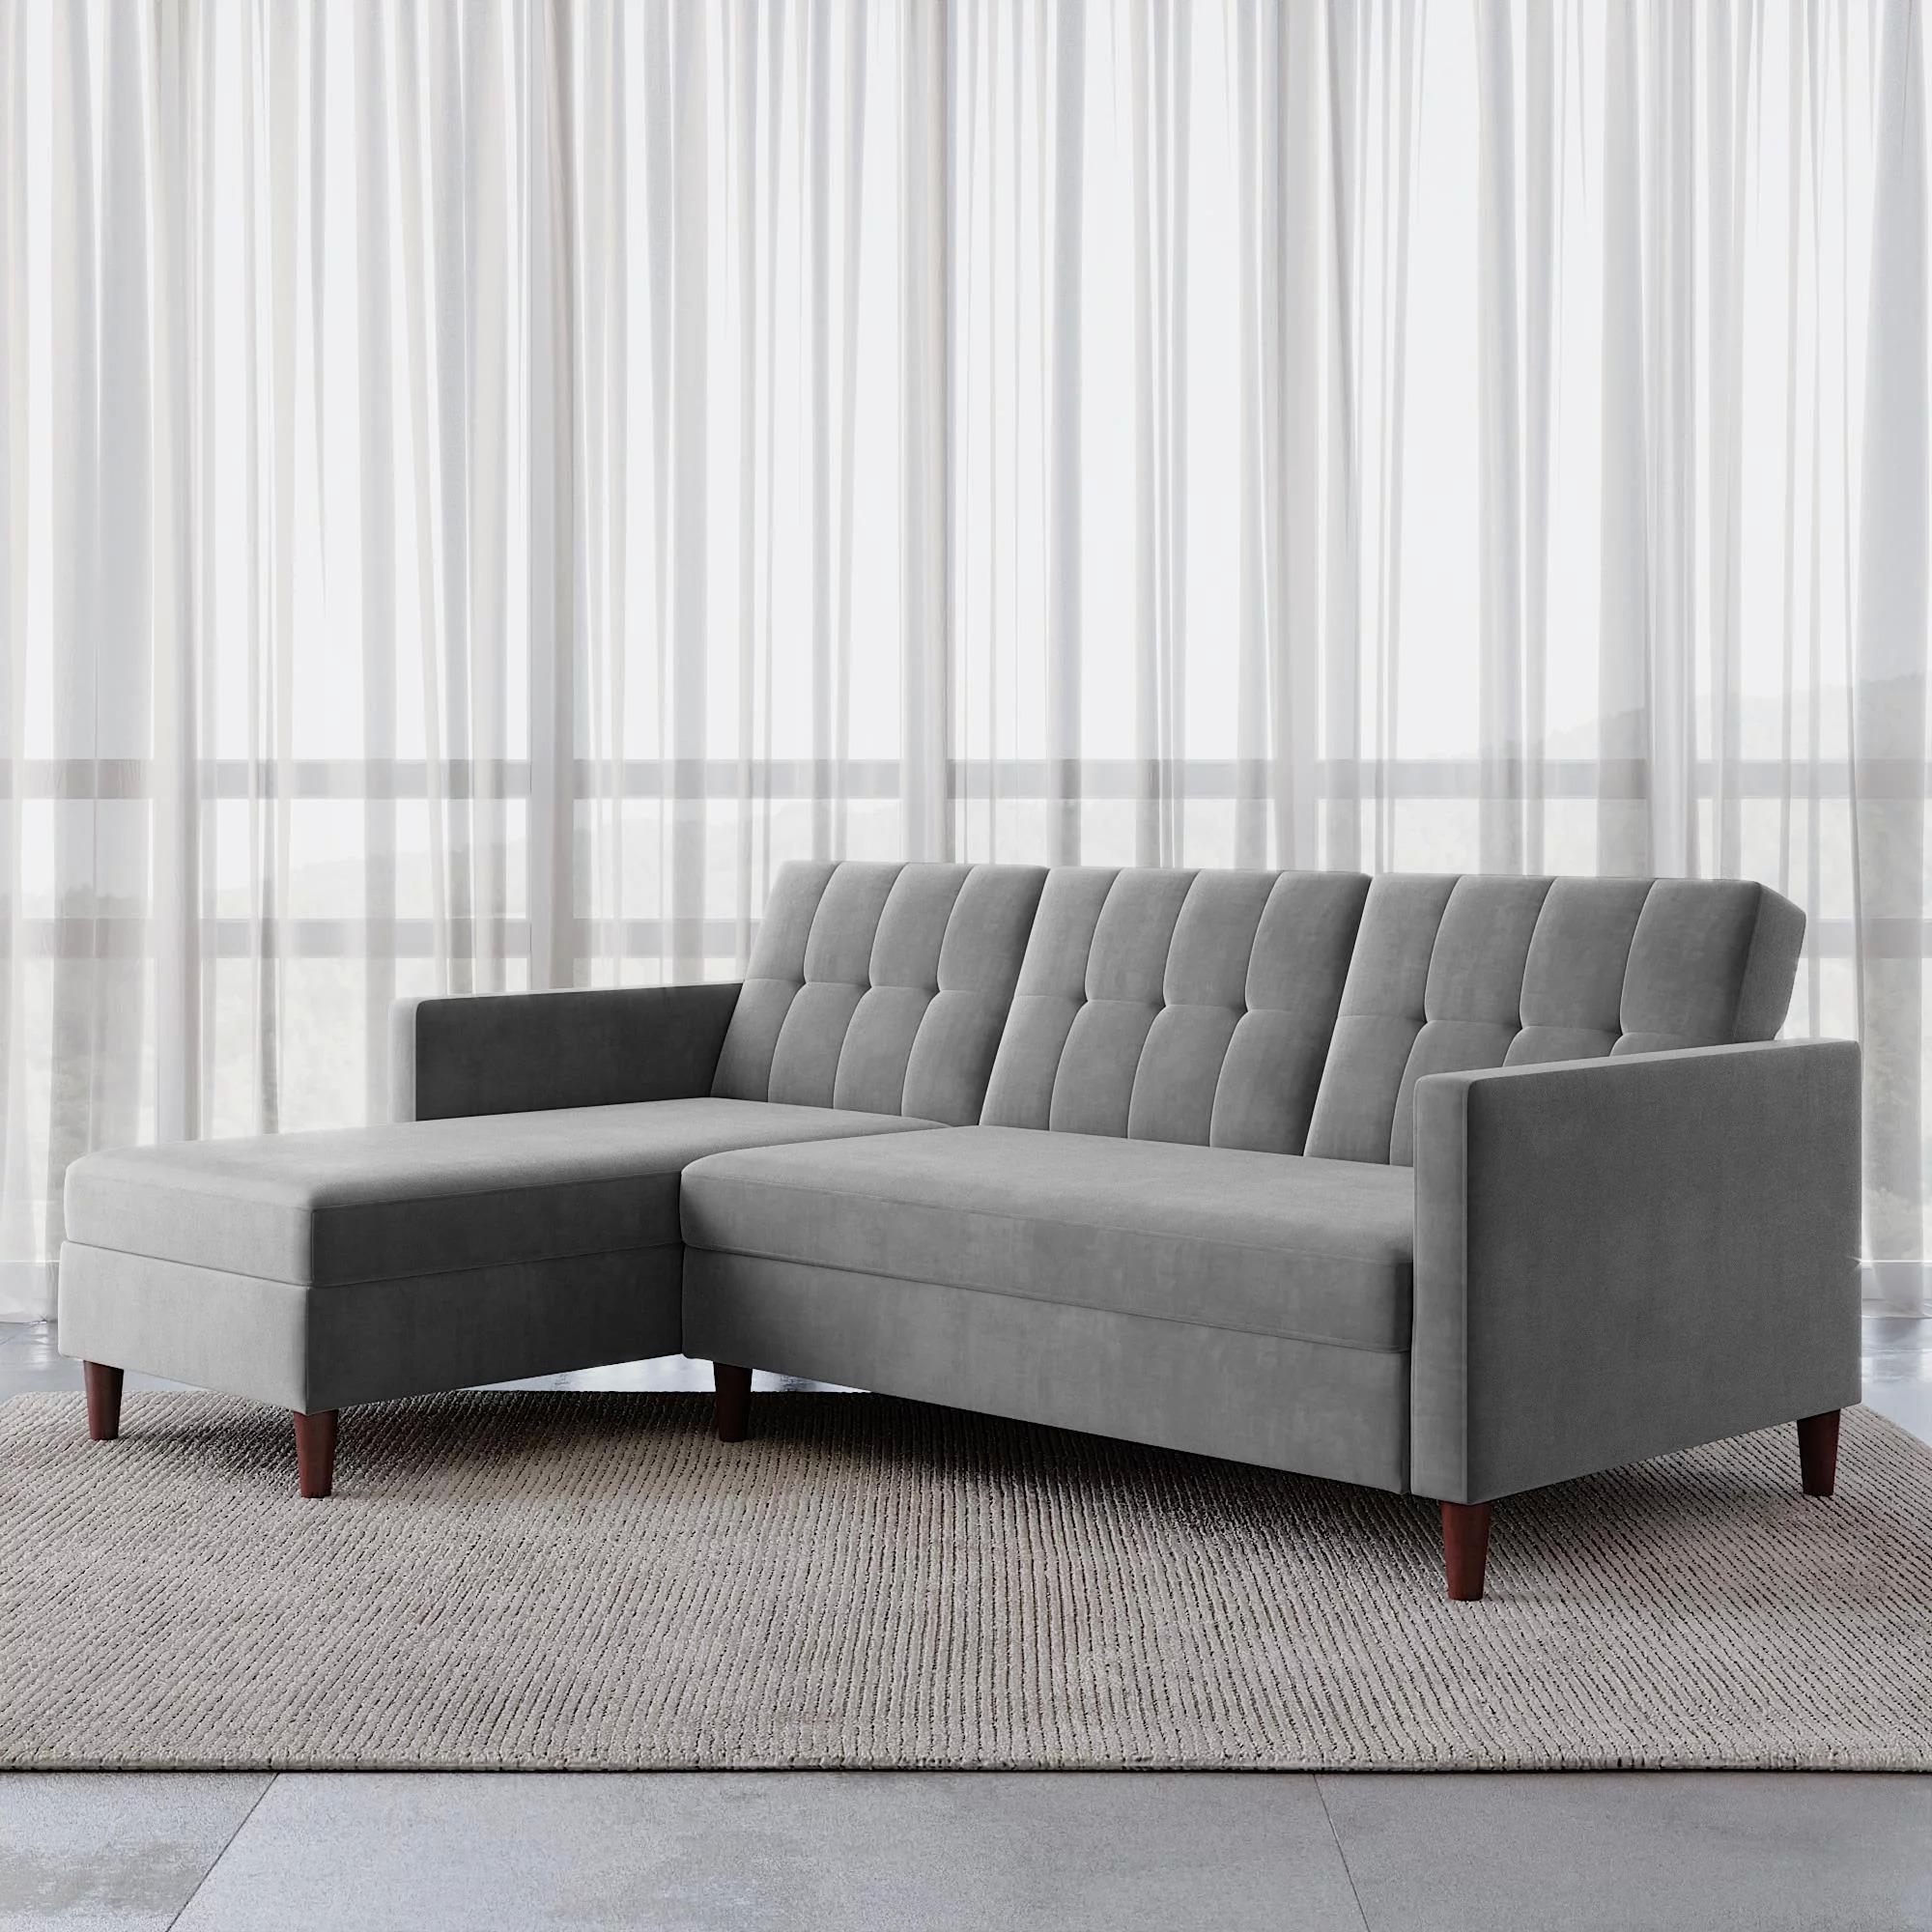 DHP Hartford Storage Reversible Sectional Futon with Chaise for $268 Shipped